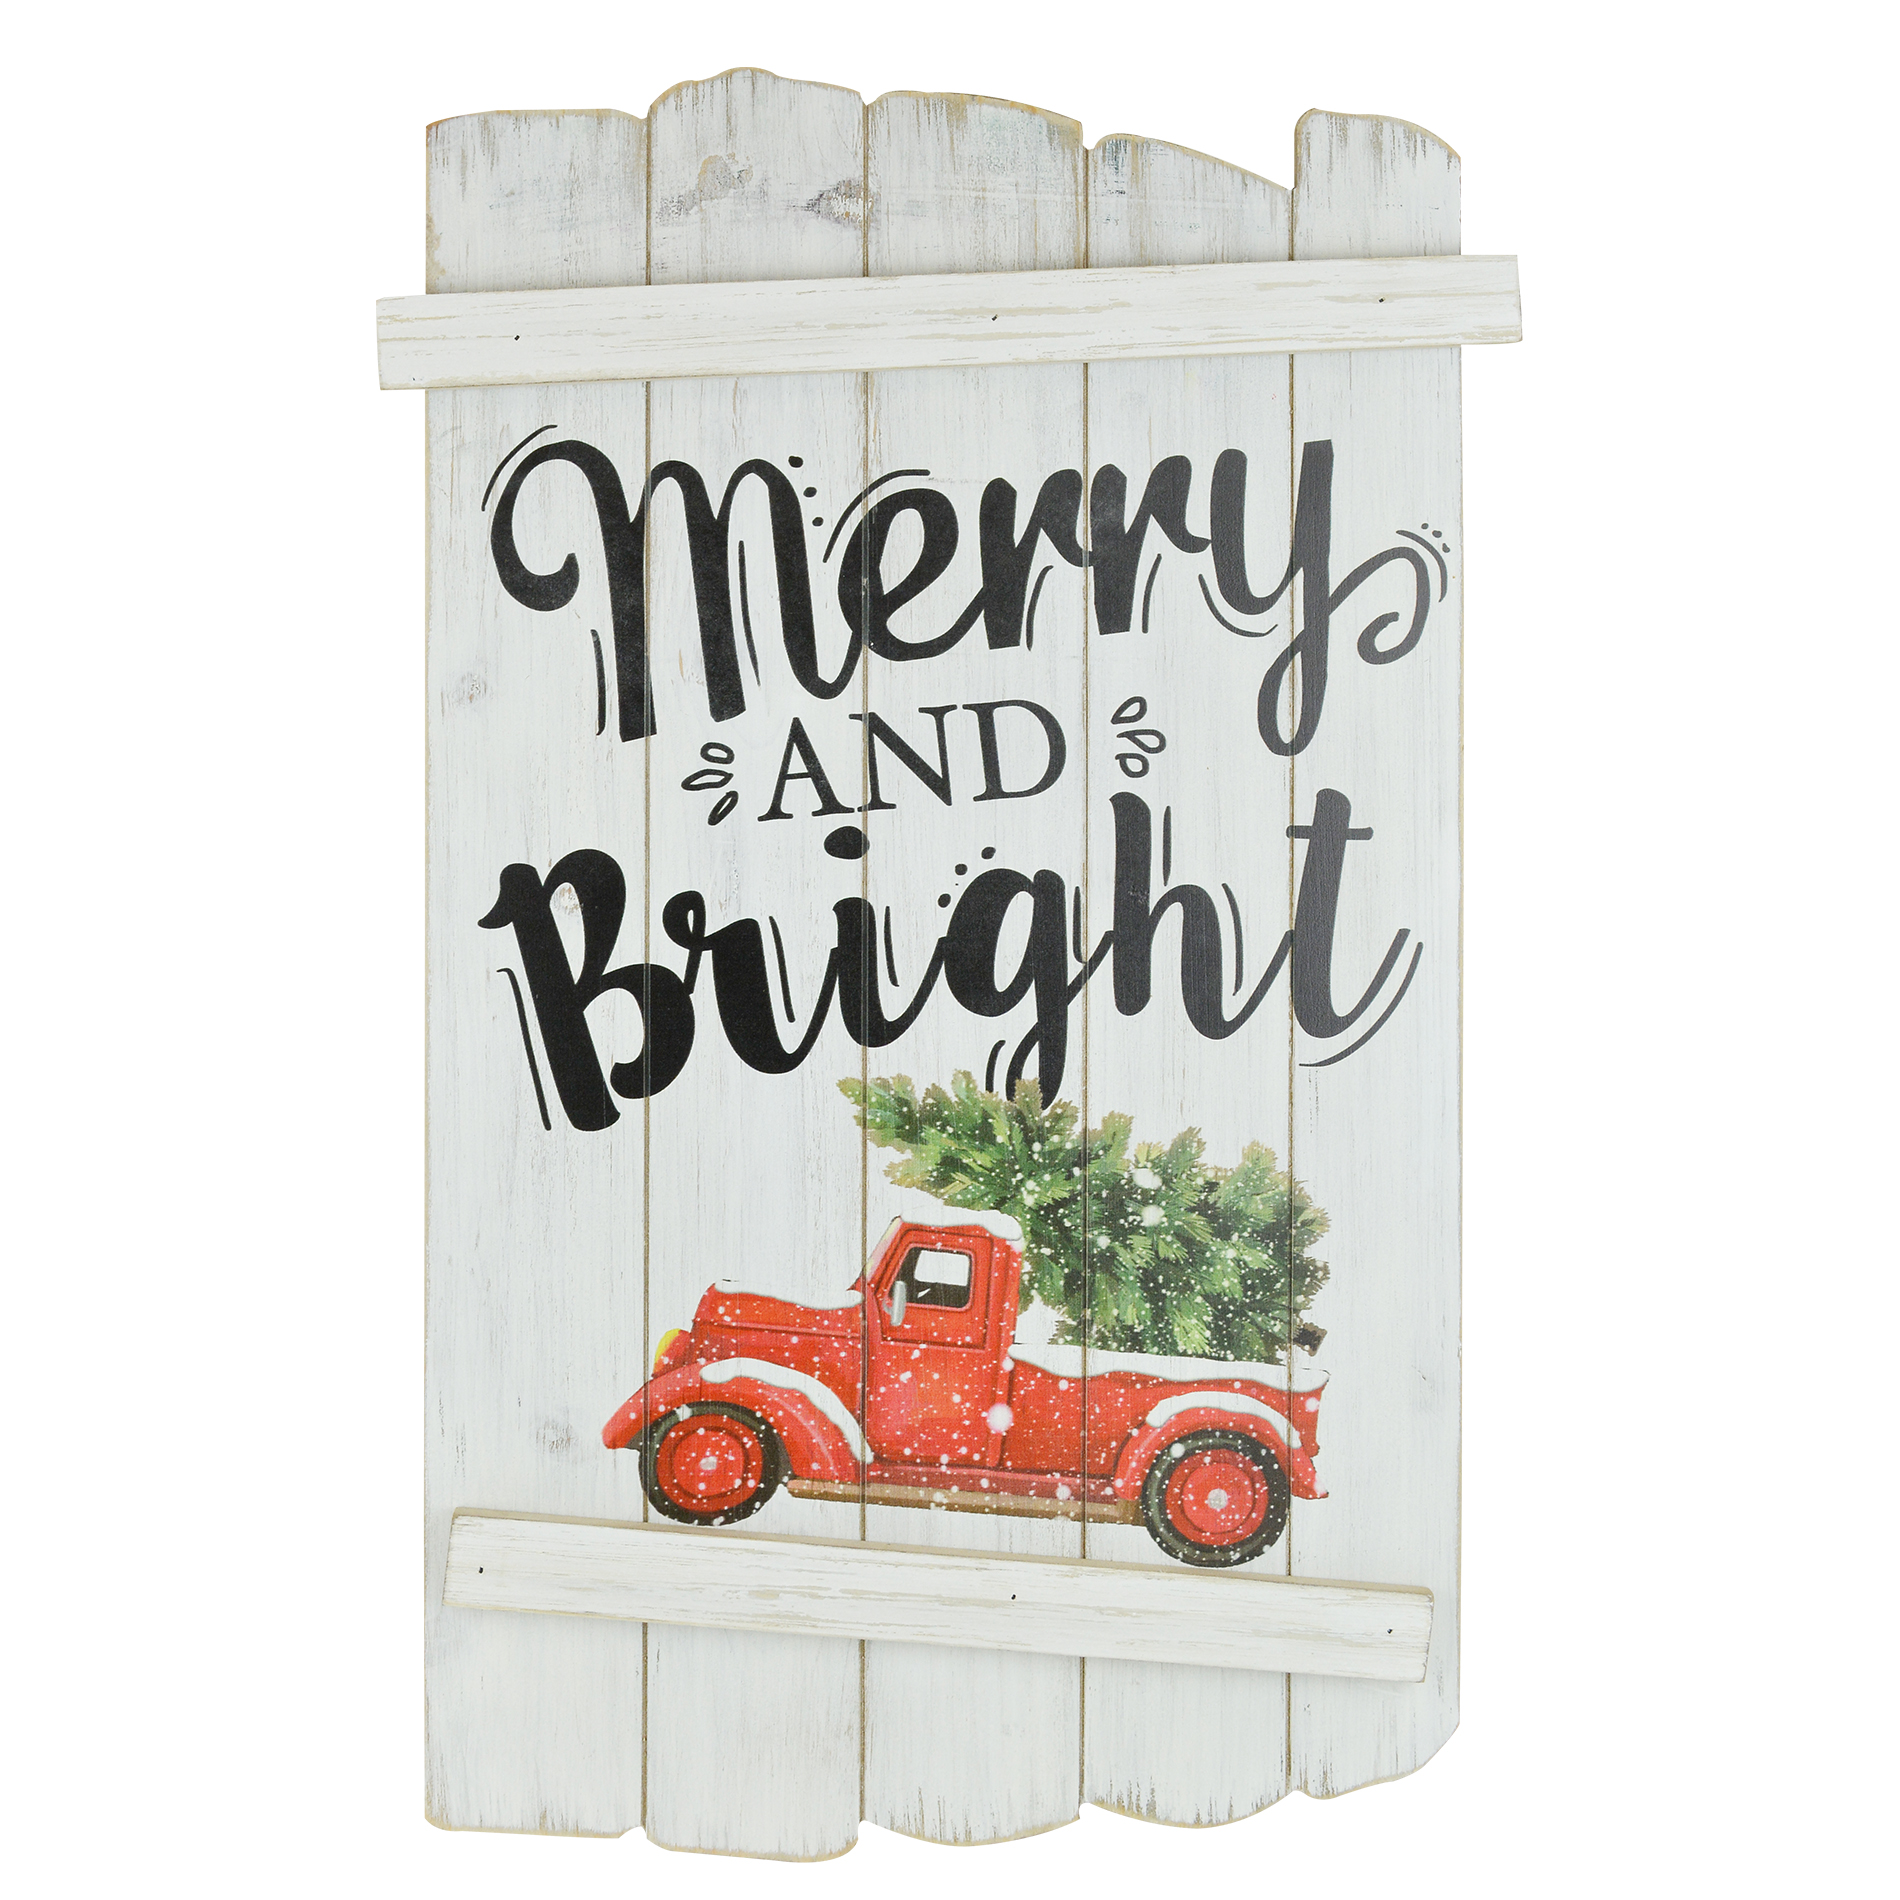 Merry and Bright Wall Plaque